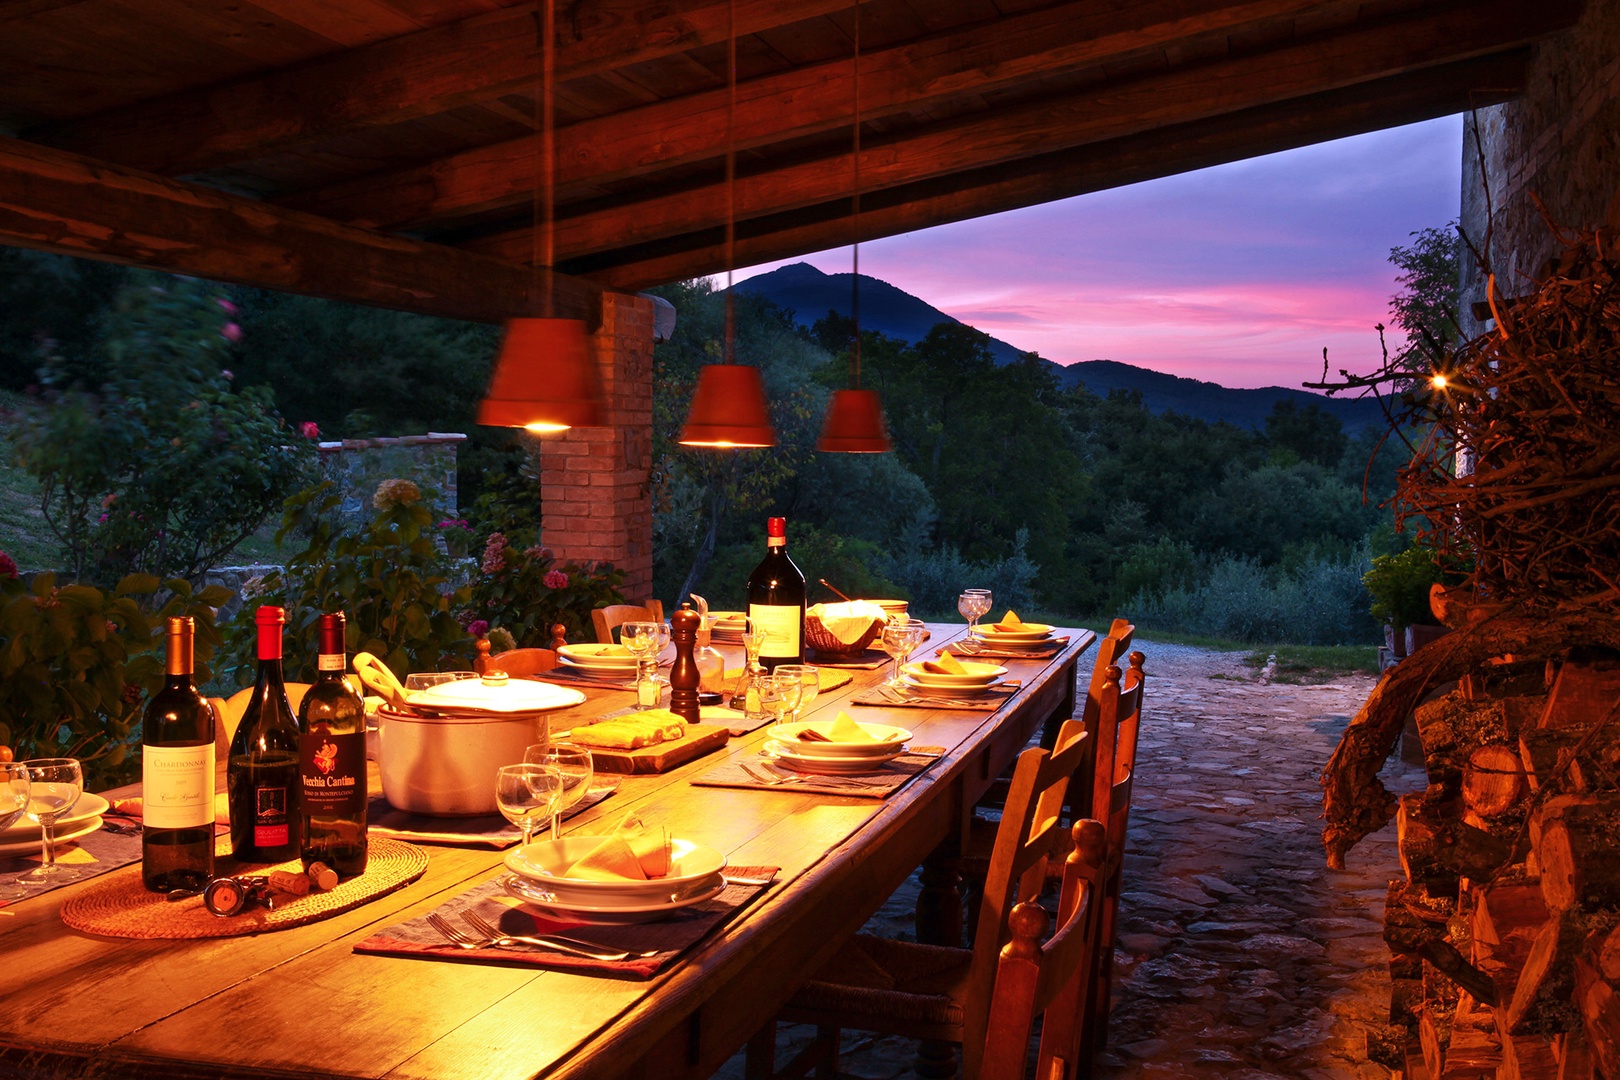 What better way to enjoy the sunset than with a Tuscan feast outside on the patio.